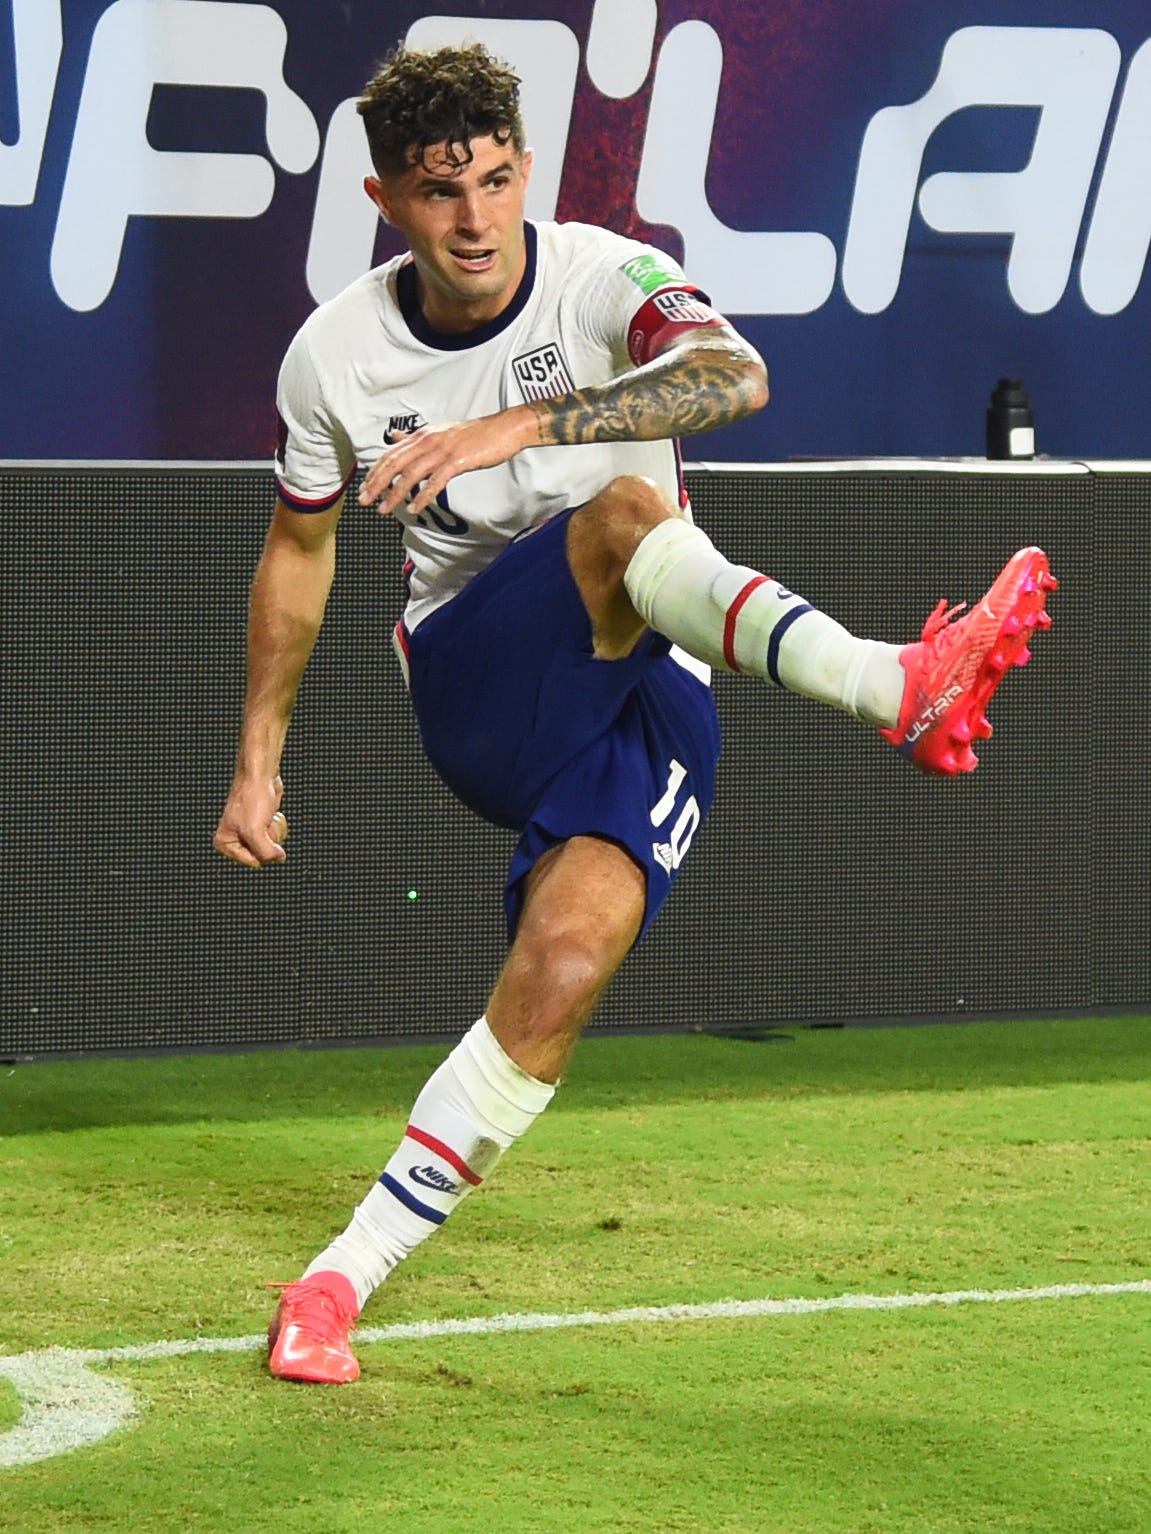 An action image of Christian Pulisic  playing soccer.